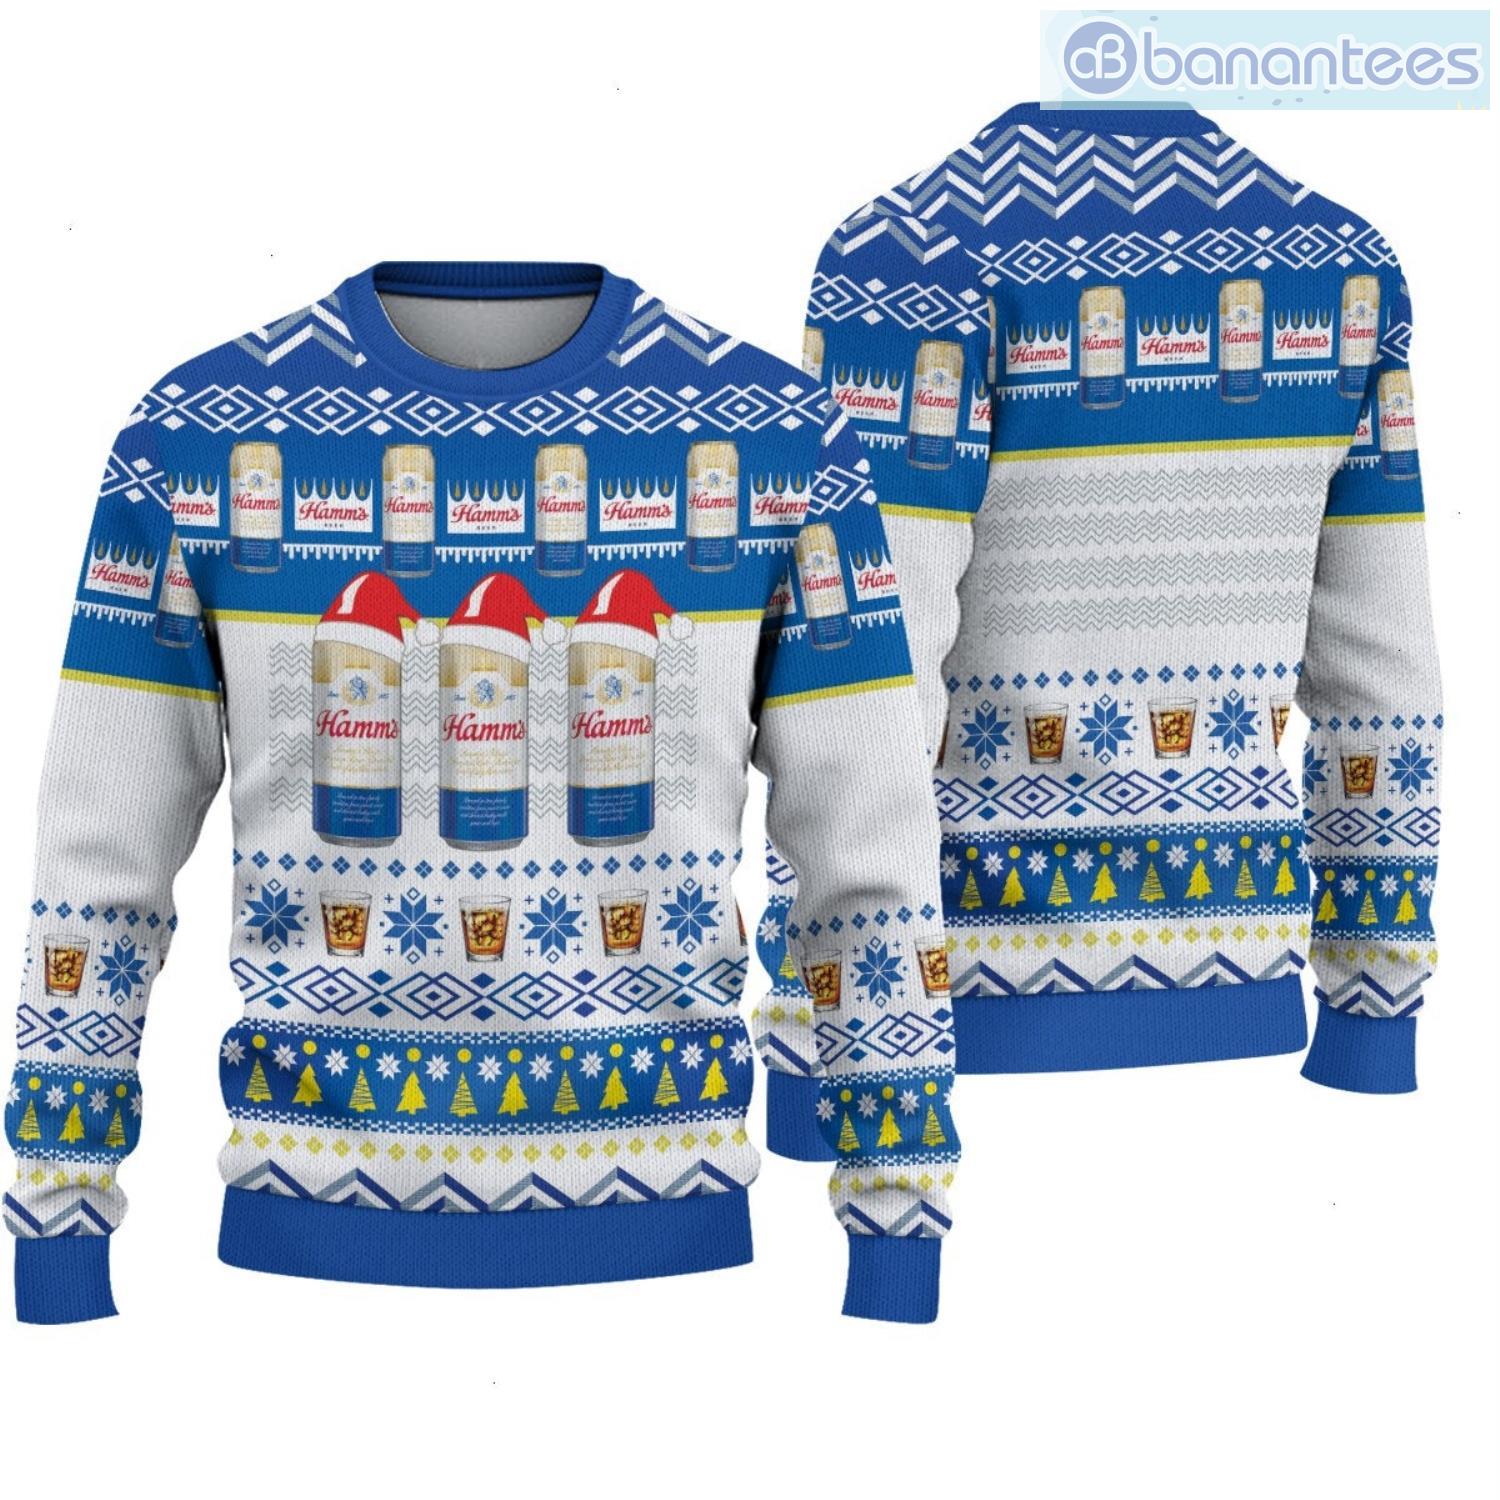 Publix Ugly Christmas Sweater -  Worldwide Shipping